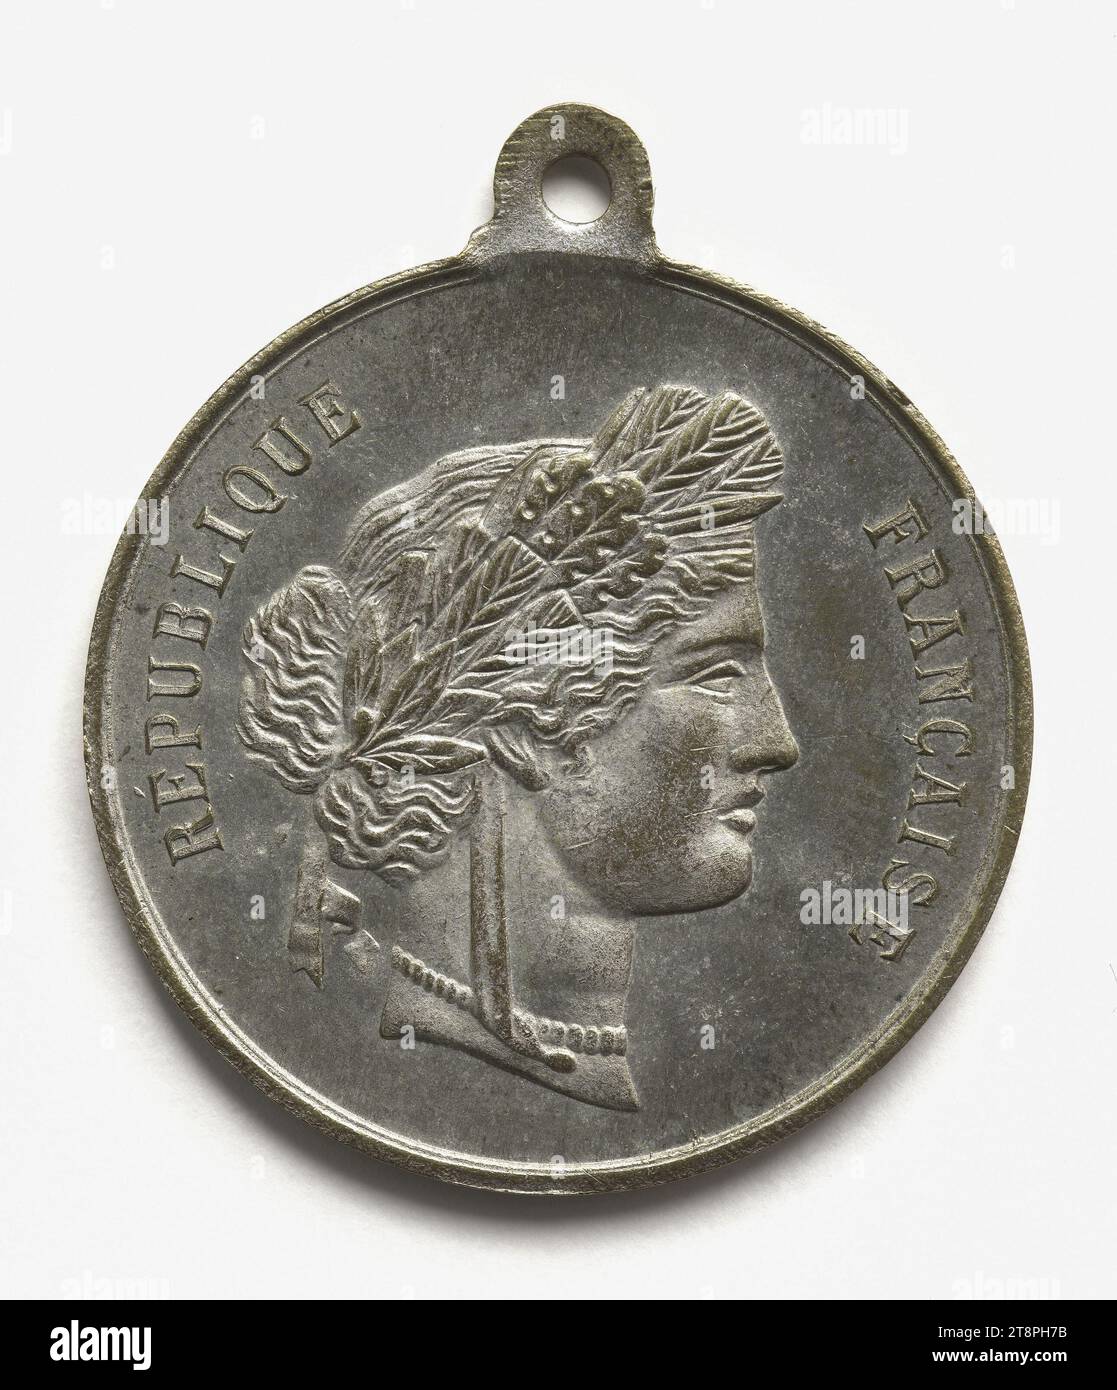 Great competition of music, harmony, orphéon and brass bands in Ferté-sous-Jouarre, May 25, 1879, In 1879, Numismatic, Medal, Copper, Silvered = silver plating, Dimensions - Work: Diameter: 3.2 cm, Weight (type dimension): 7.91 g Stock Photo